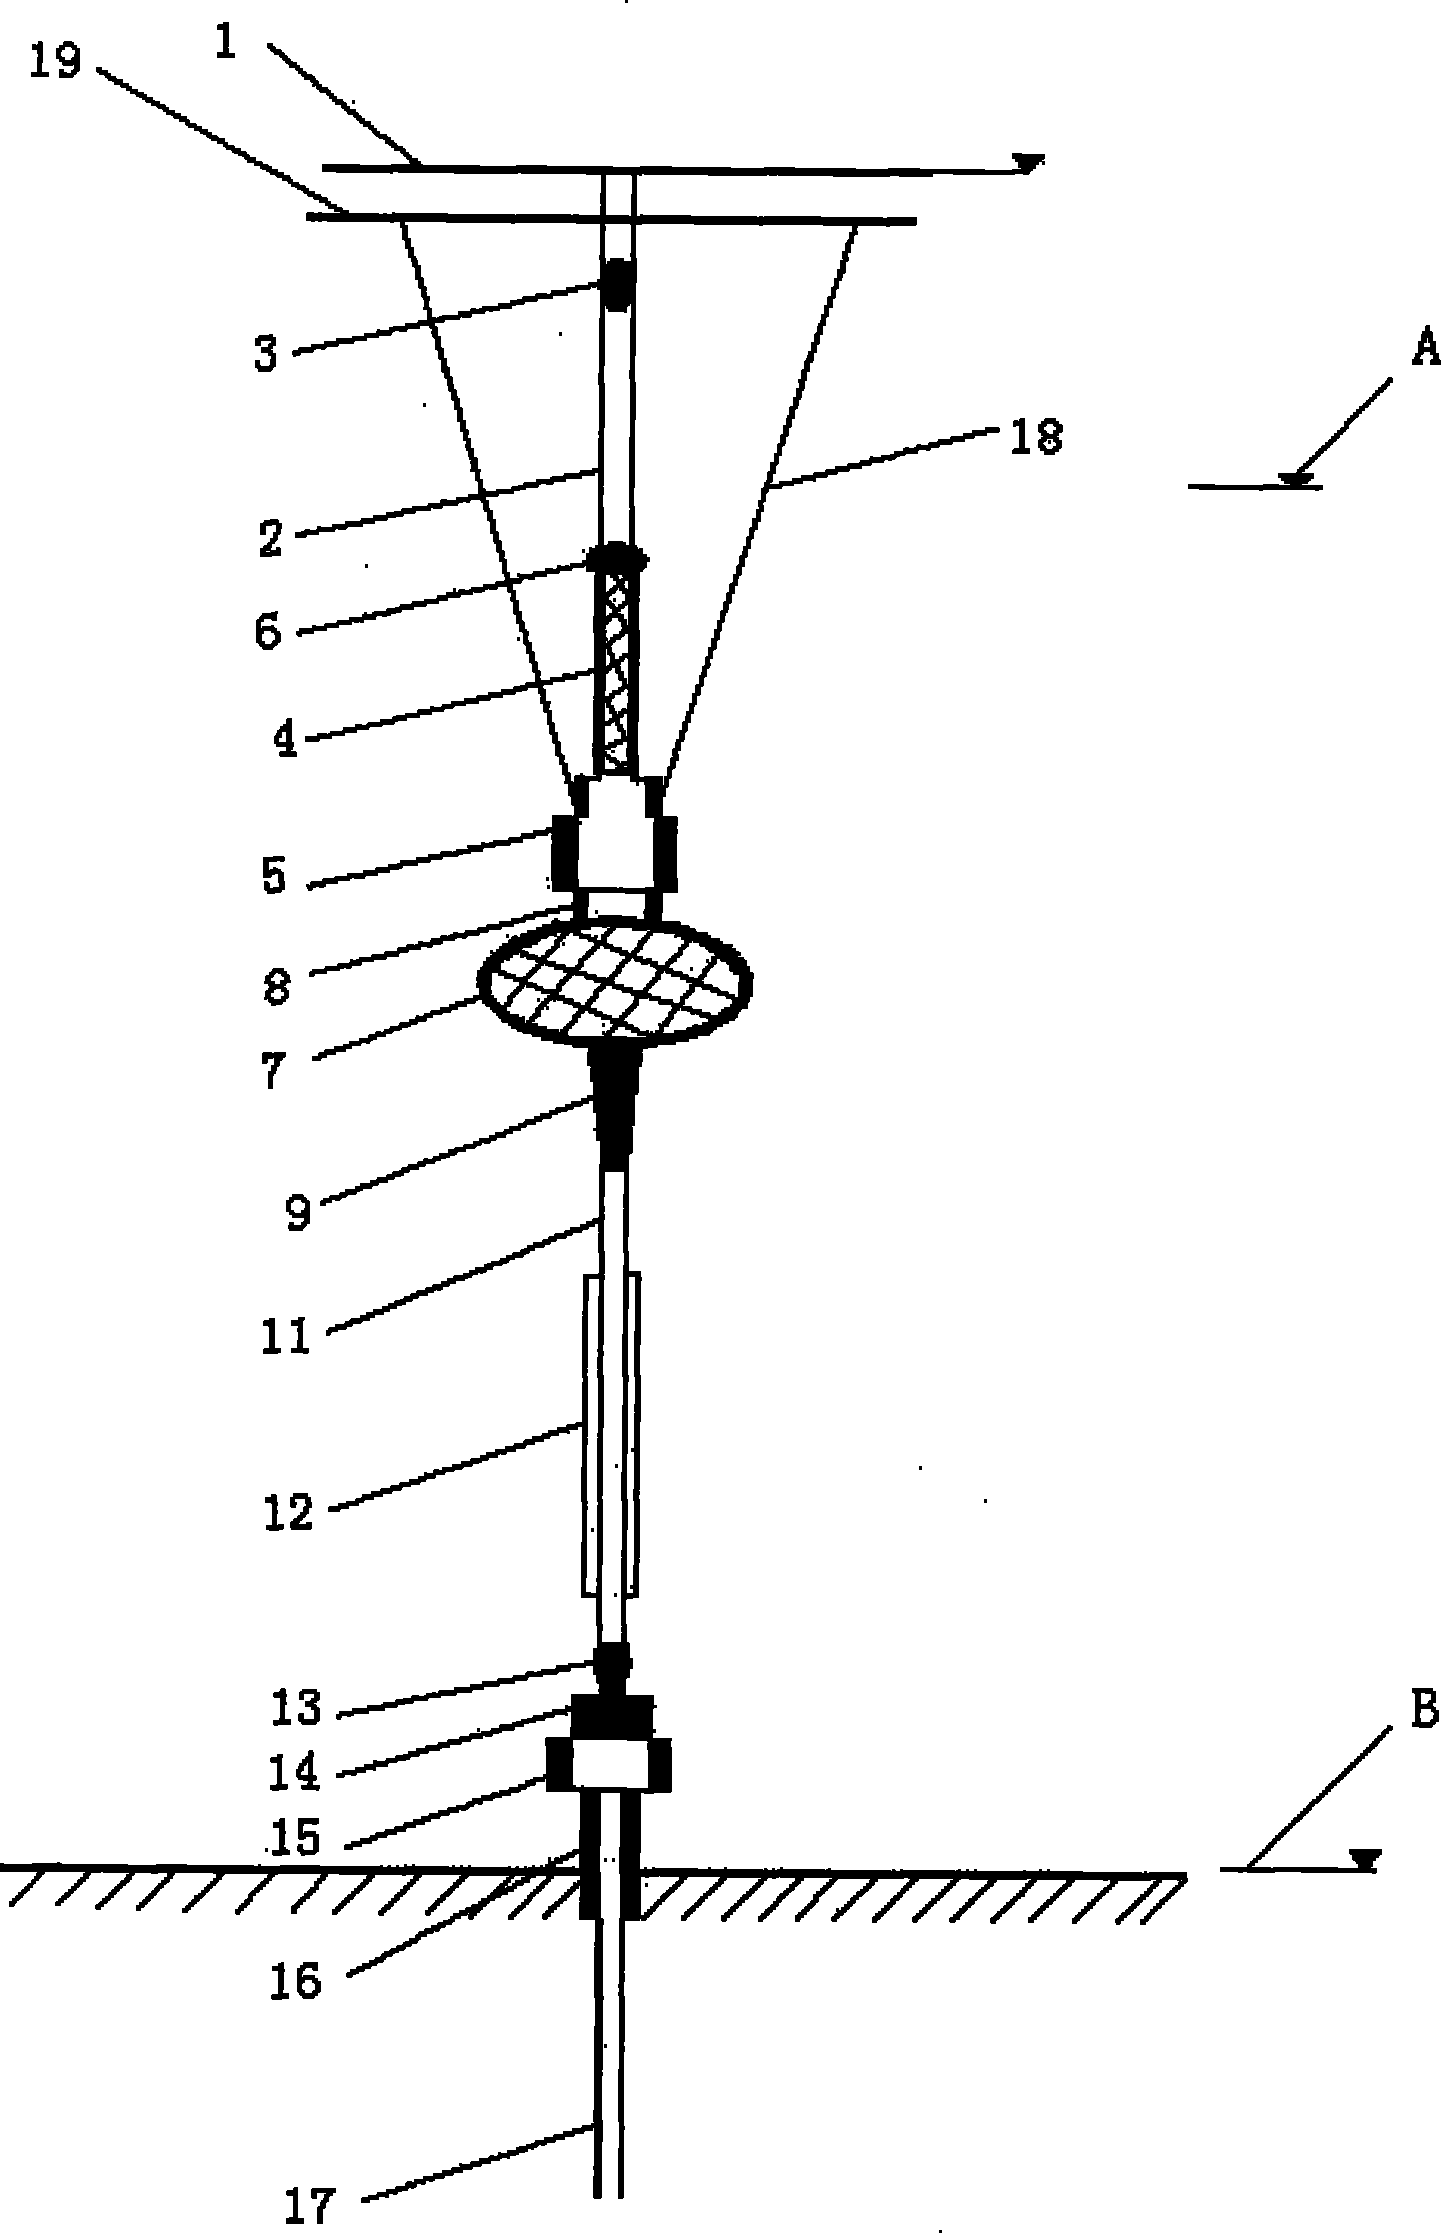 Deepwater drilling device based on near surface deviation